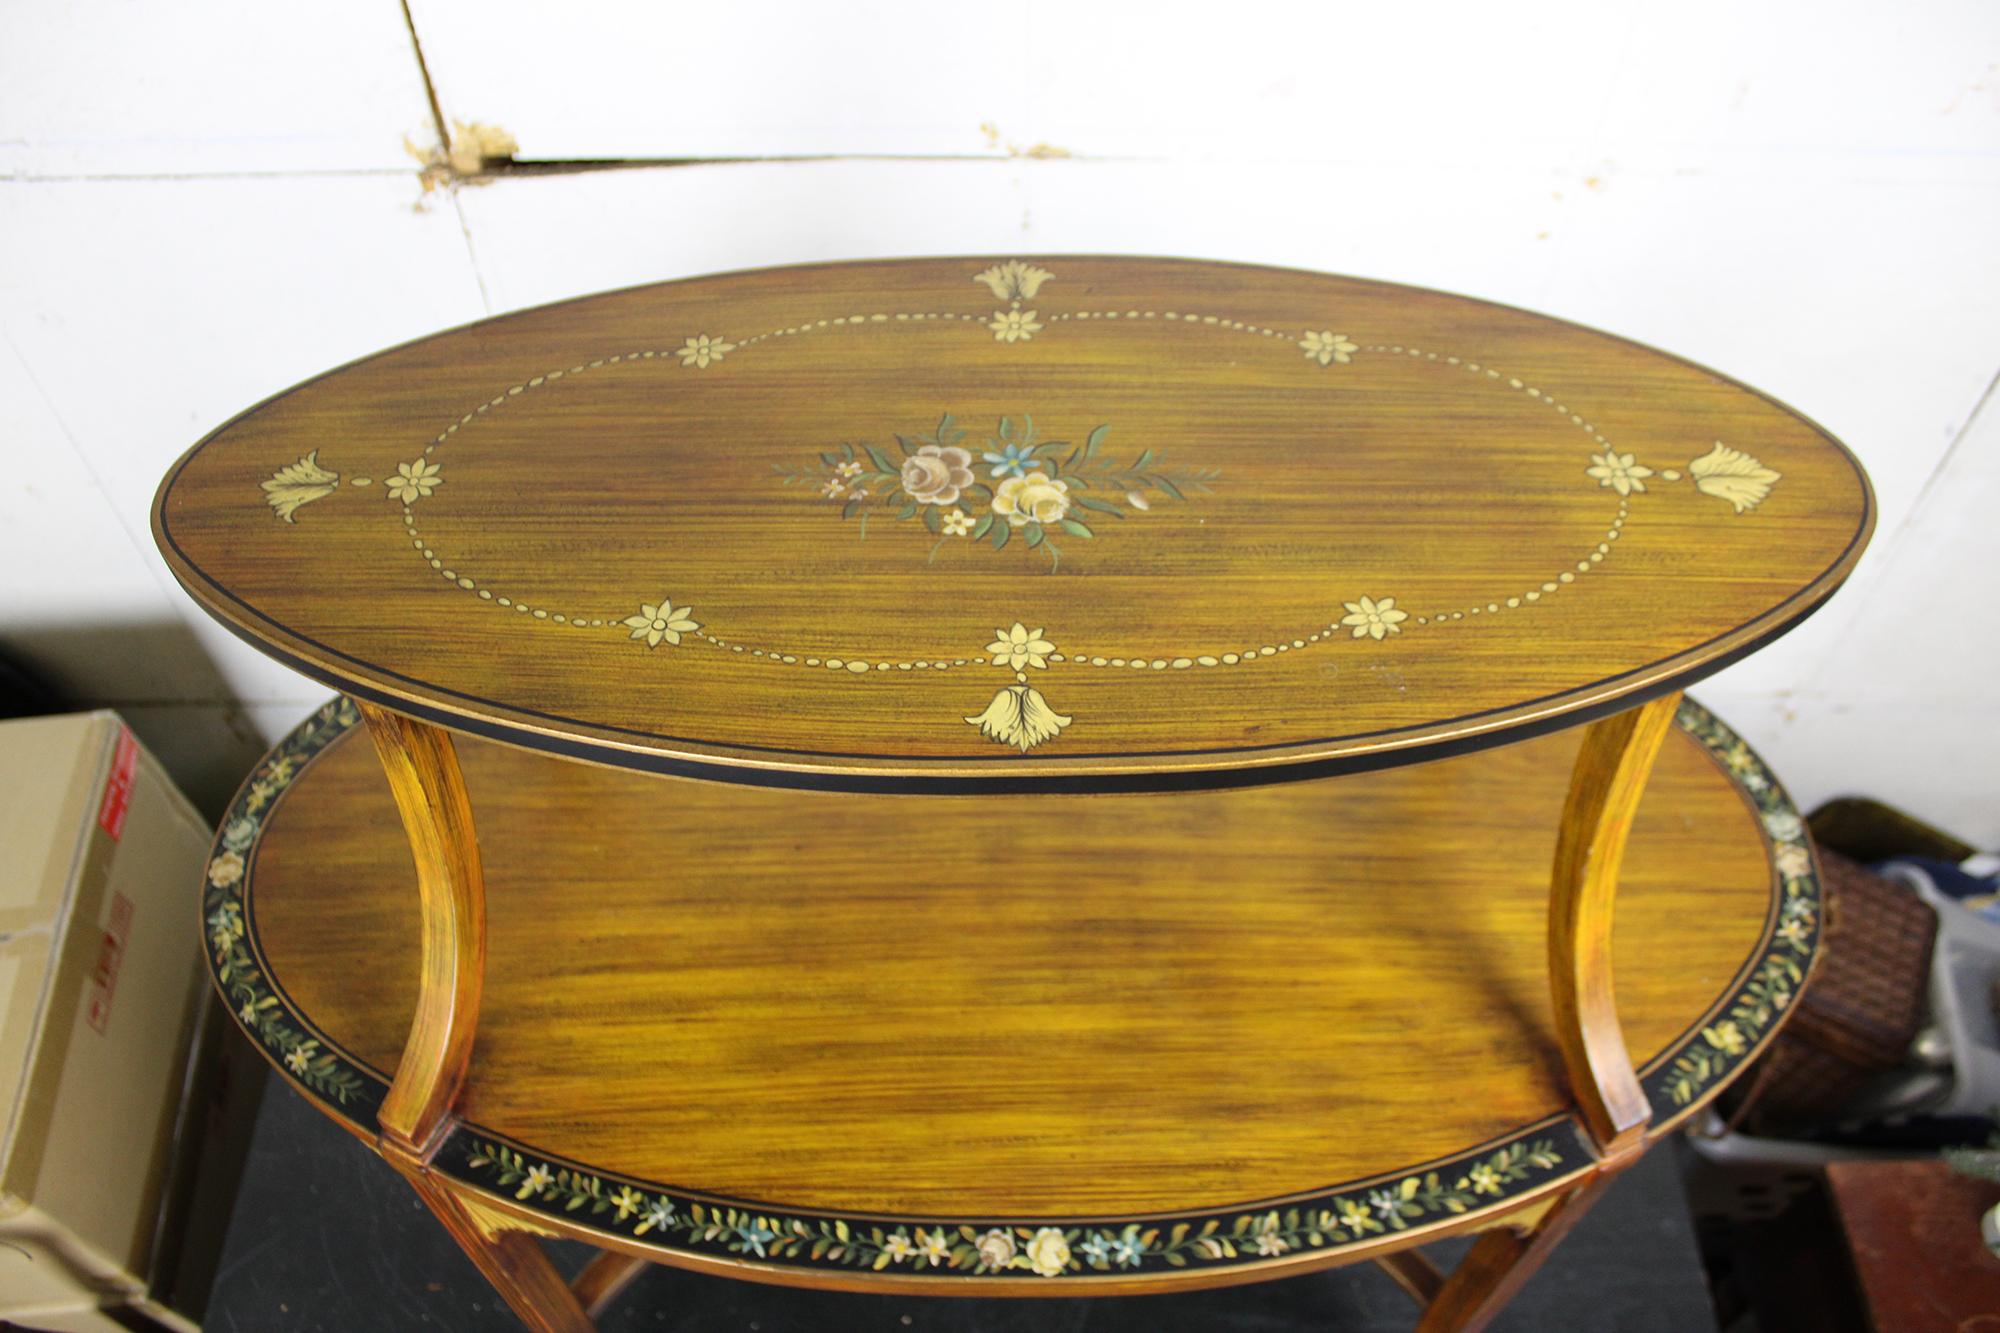 Hardwood Sarreid Edwardian Oval Tray Top Étagère Table Sheraton Revival Floral Painted 35 For Sale